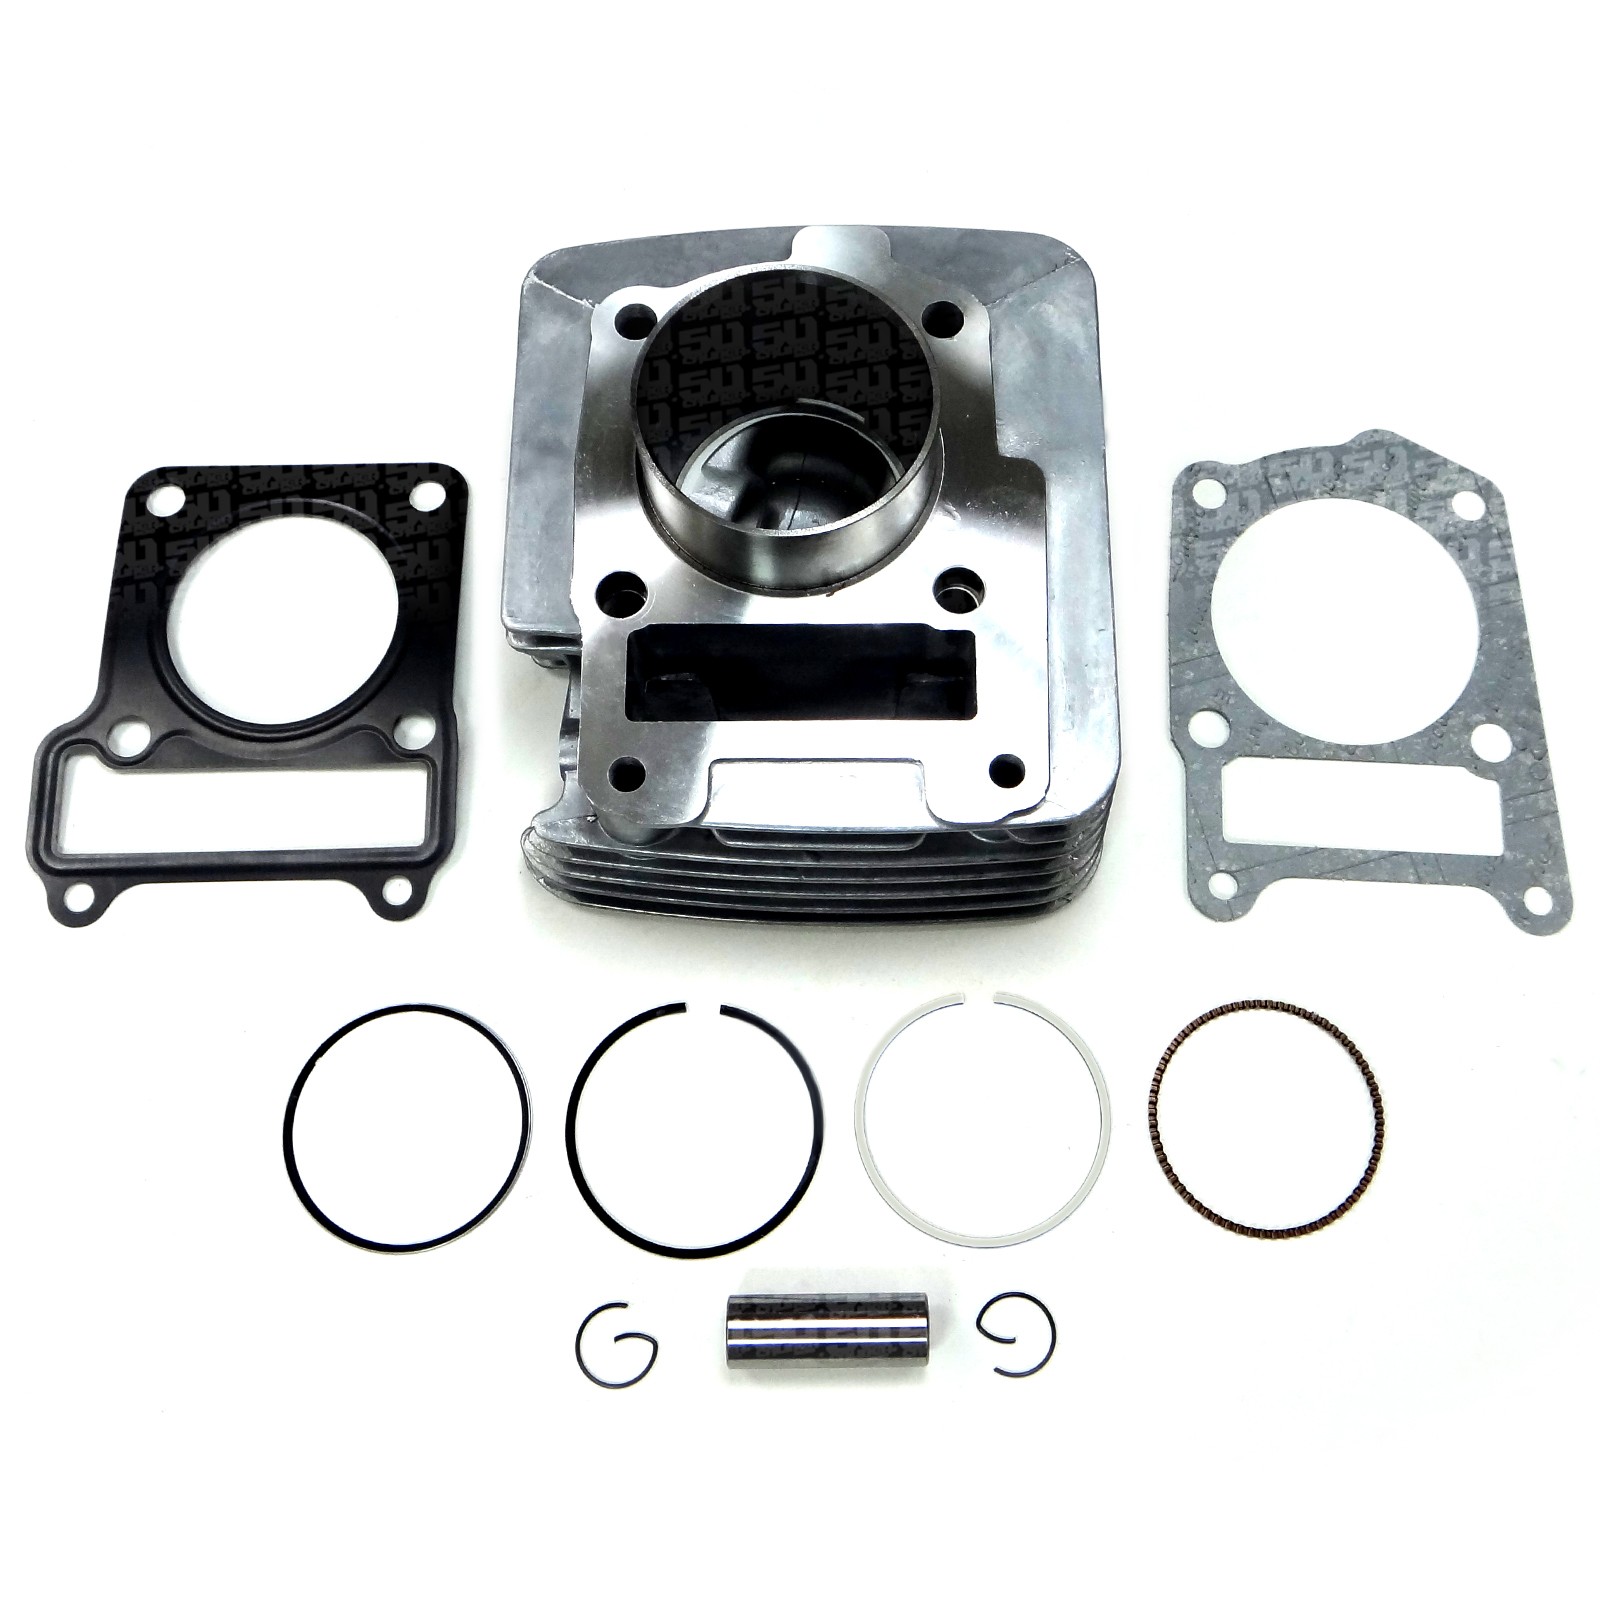 MOFANS 54mm Bore Complete Standard Sized Cylinder and Piston Kit with Gaskets Fit for Compatible with Yamaha TTR125 2000-2003 Yamaha TTR125E 2003-2004 